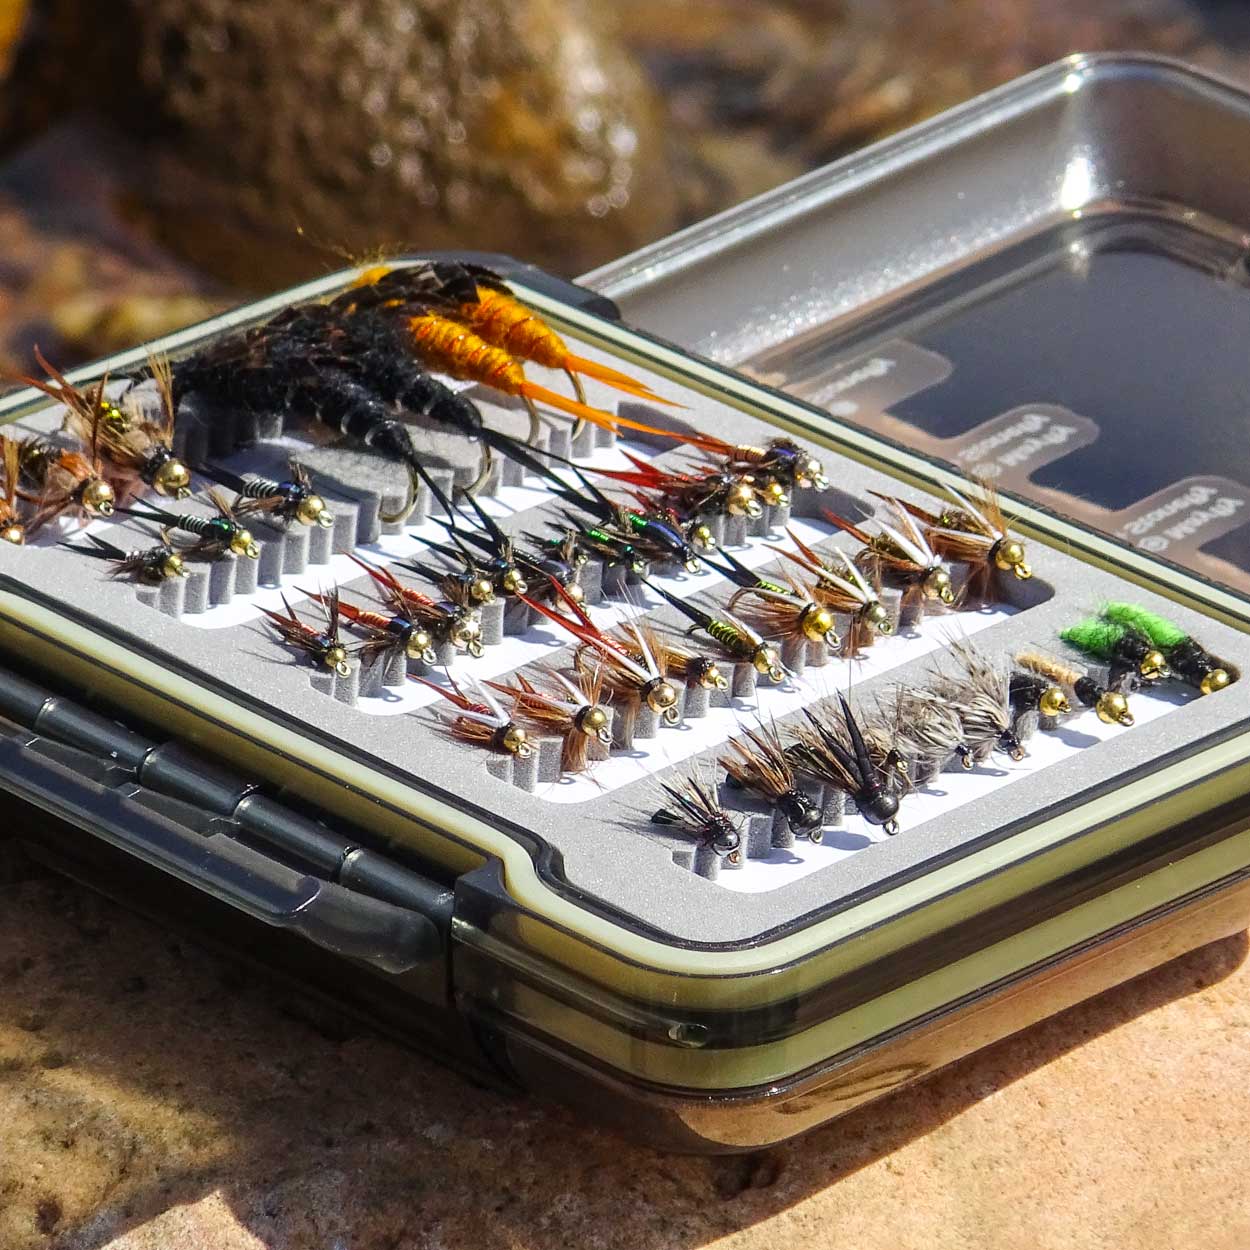 Fly Tying Kits for Beginners and Experts